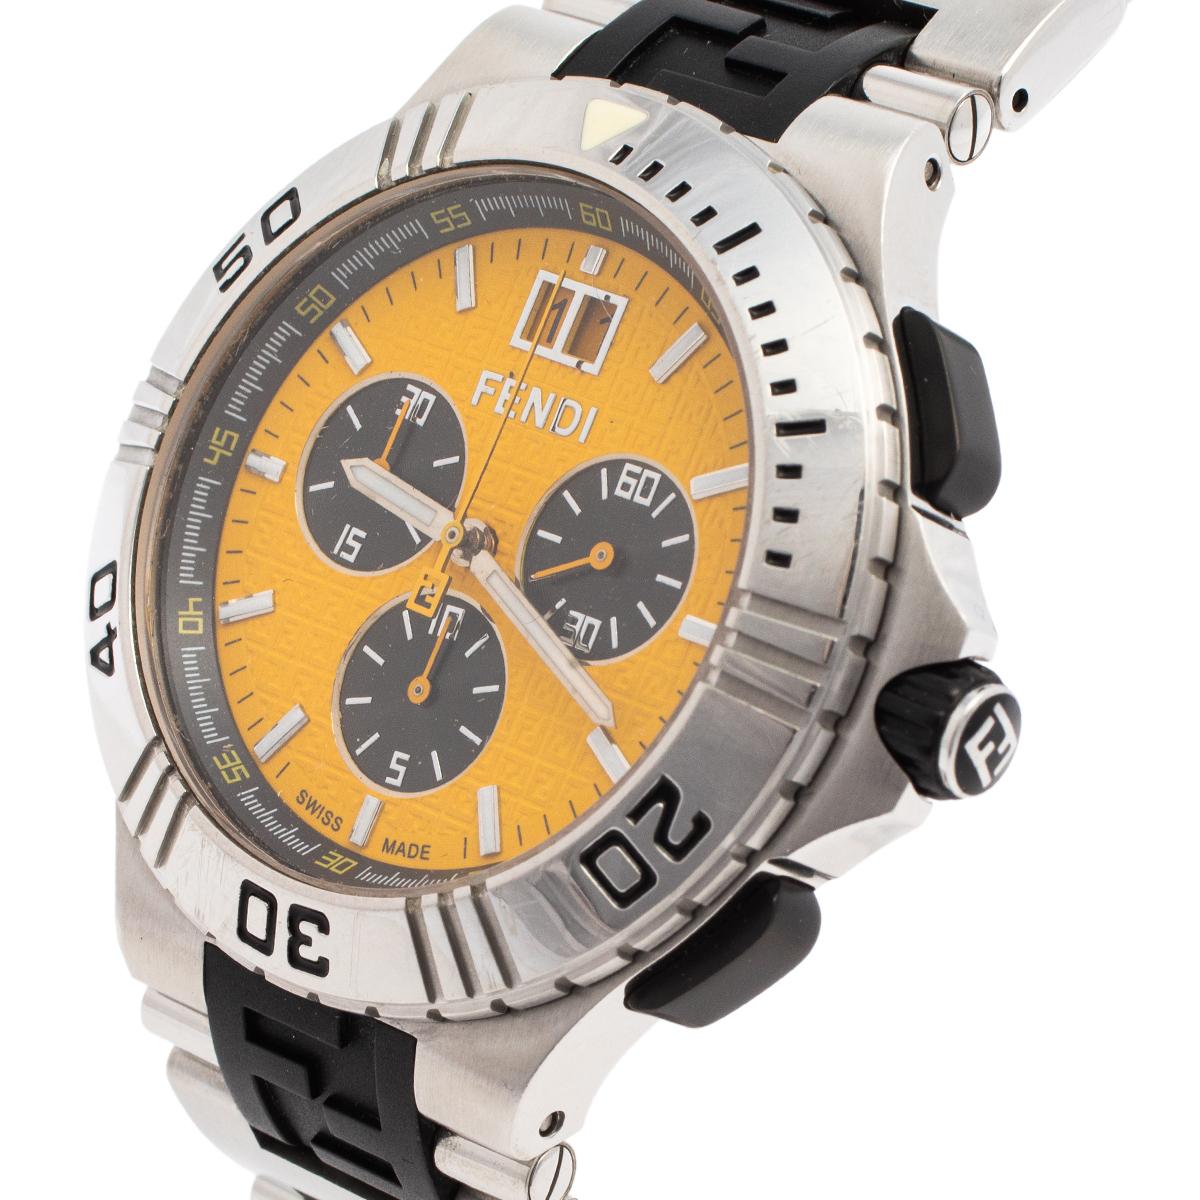 This Fendi Swiss-made watch is crafted from stainless steel and it carries the brand's signature logo on the case. The watch has a yellow dial with three hands and hour markers. It is equipped with three subdials and a tachymeter around the outer